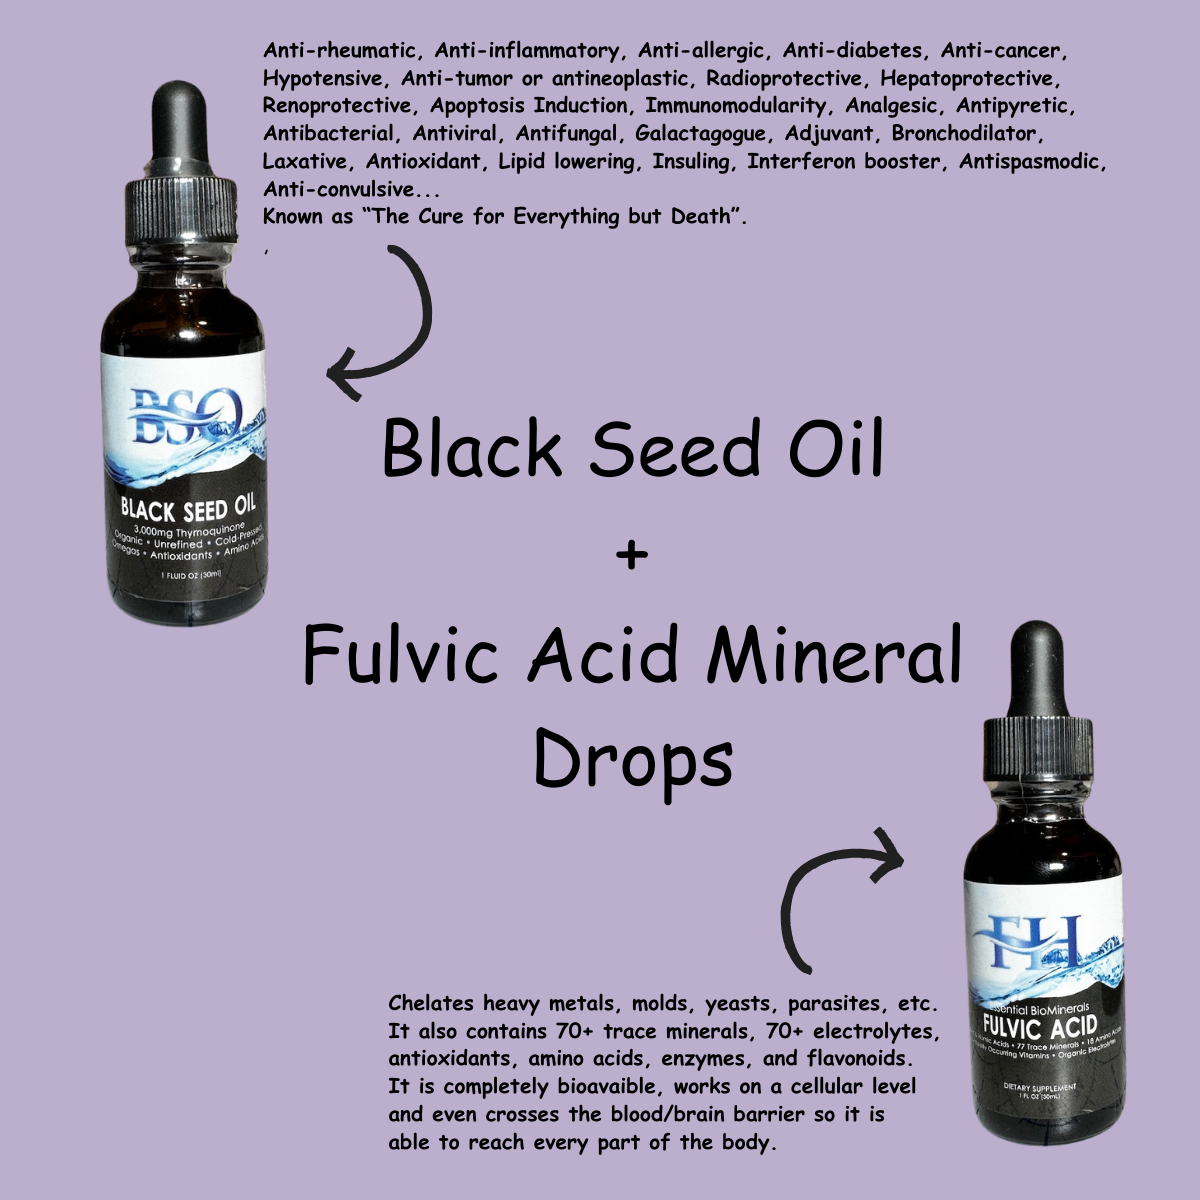 Bundle and Save | Fulvic Acid Mineral Drops | Black Seed Oil | Apothecary